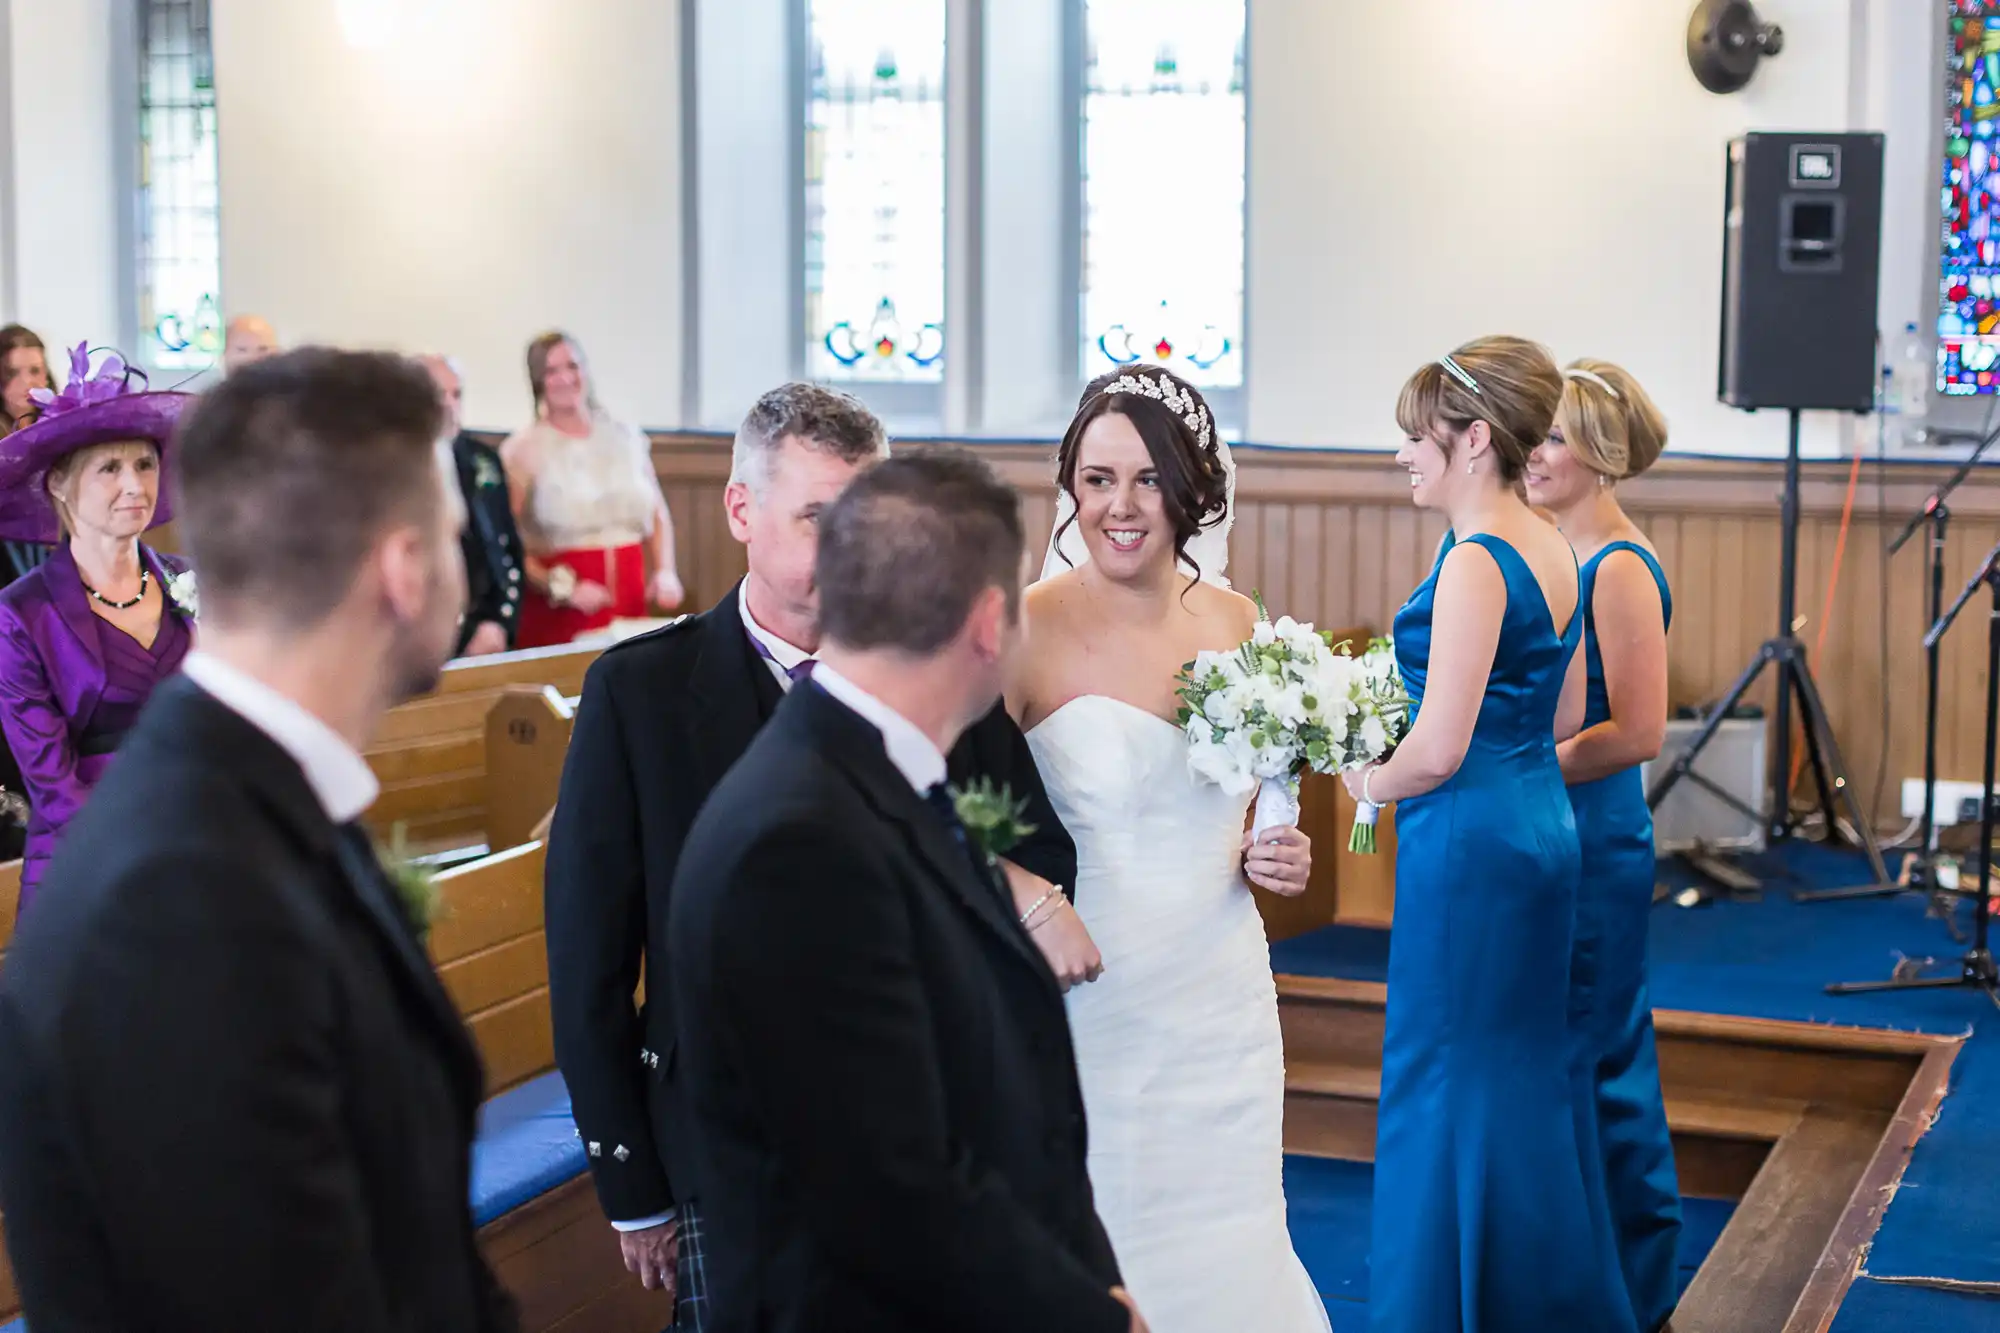 A bride smiling, holding a bouquet in a church, with wedding guests and a groom in the foreground. stained glass windows and a band setup are visible in the background.